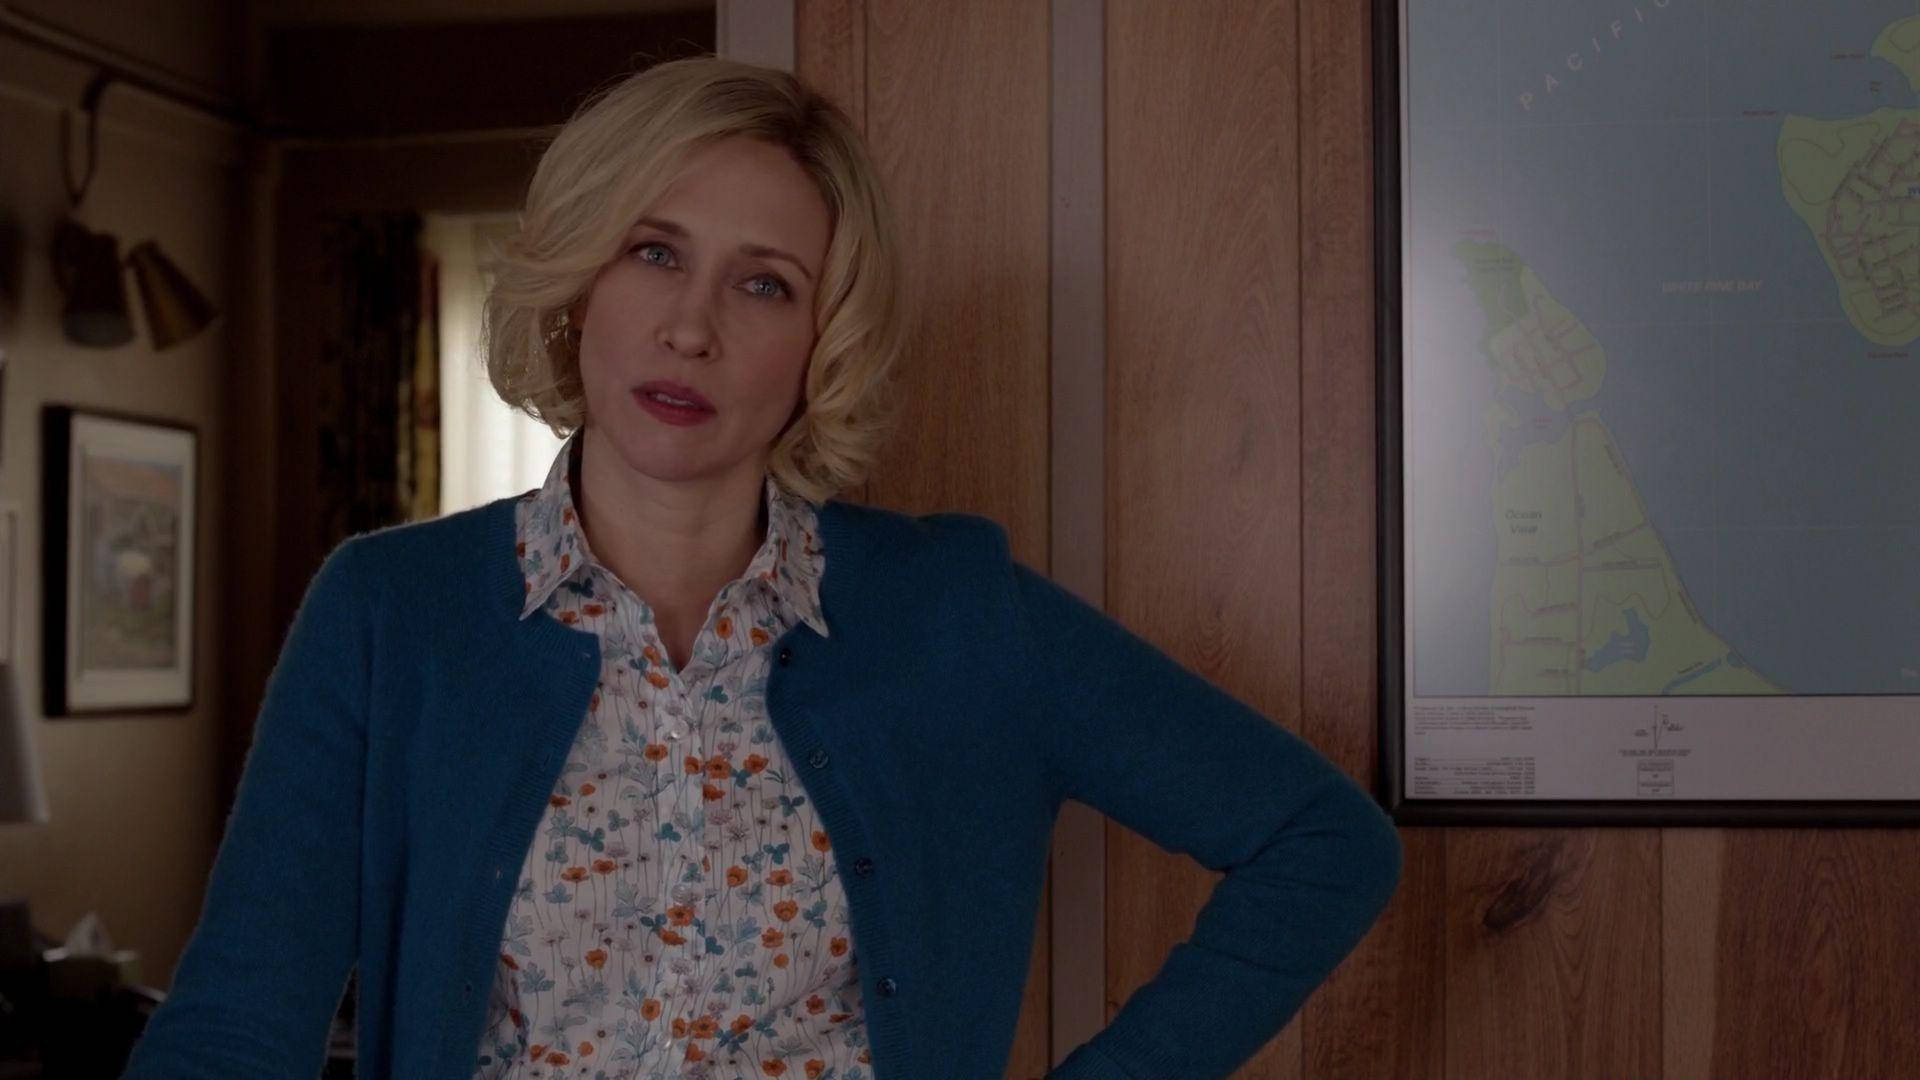 Intense scene from the Bates Motel series featuring Norma Bates. Wallpaper